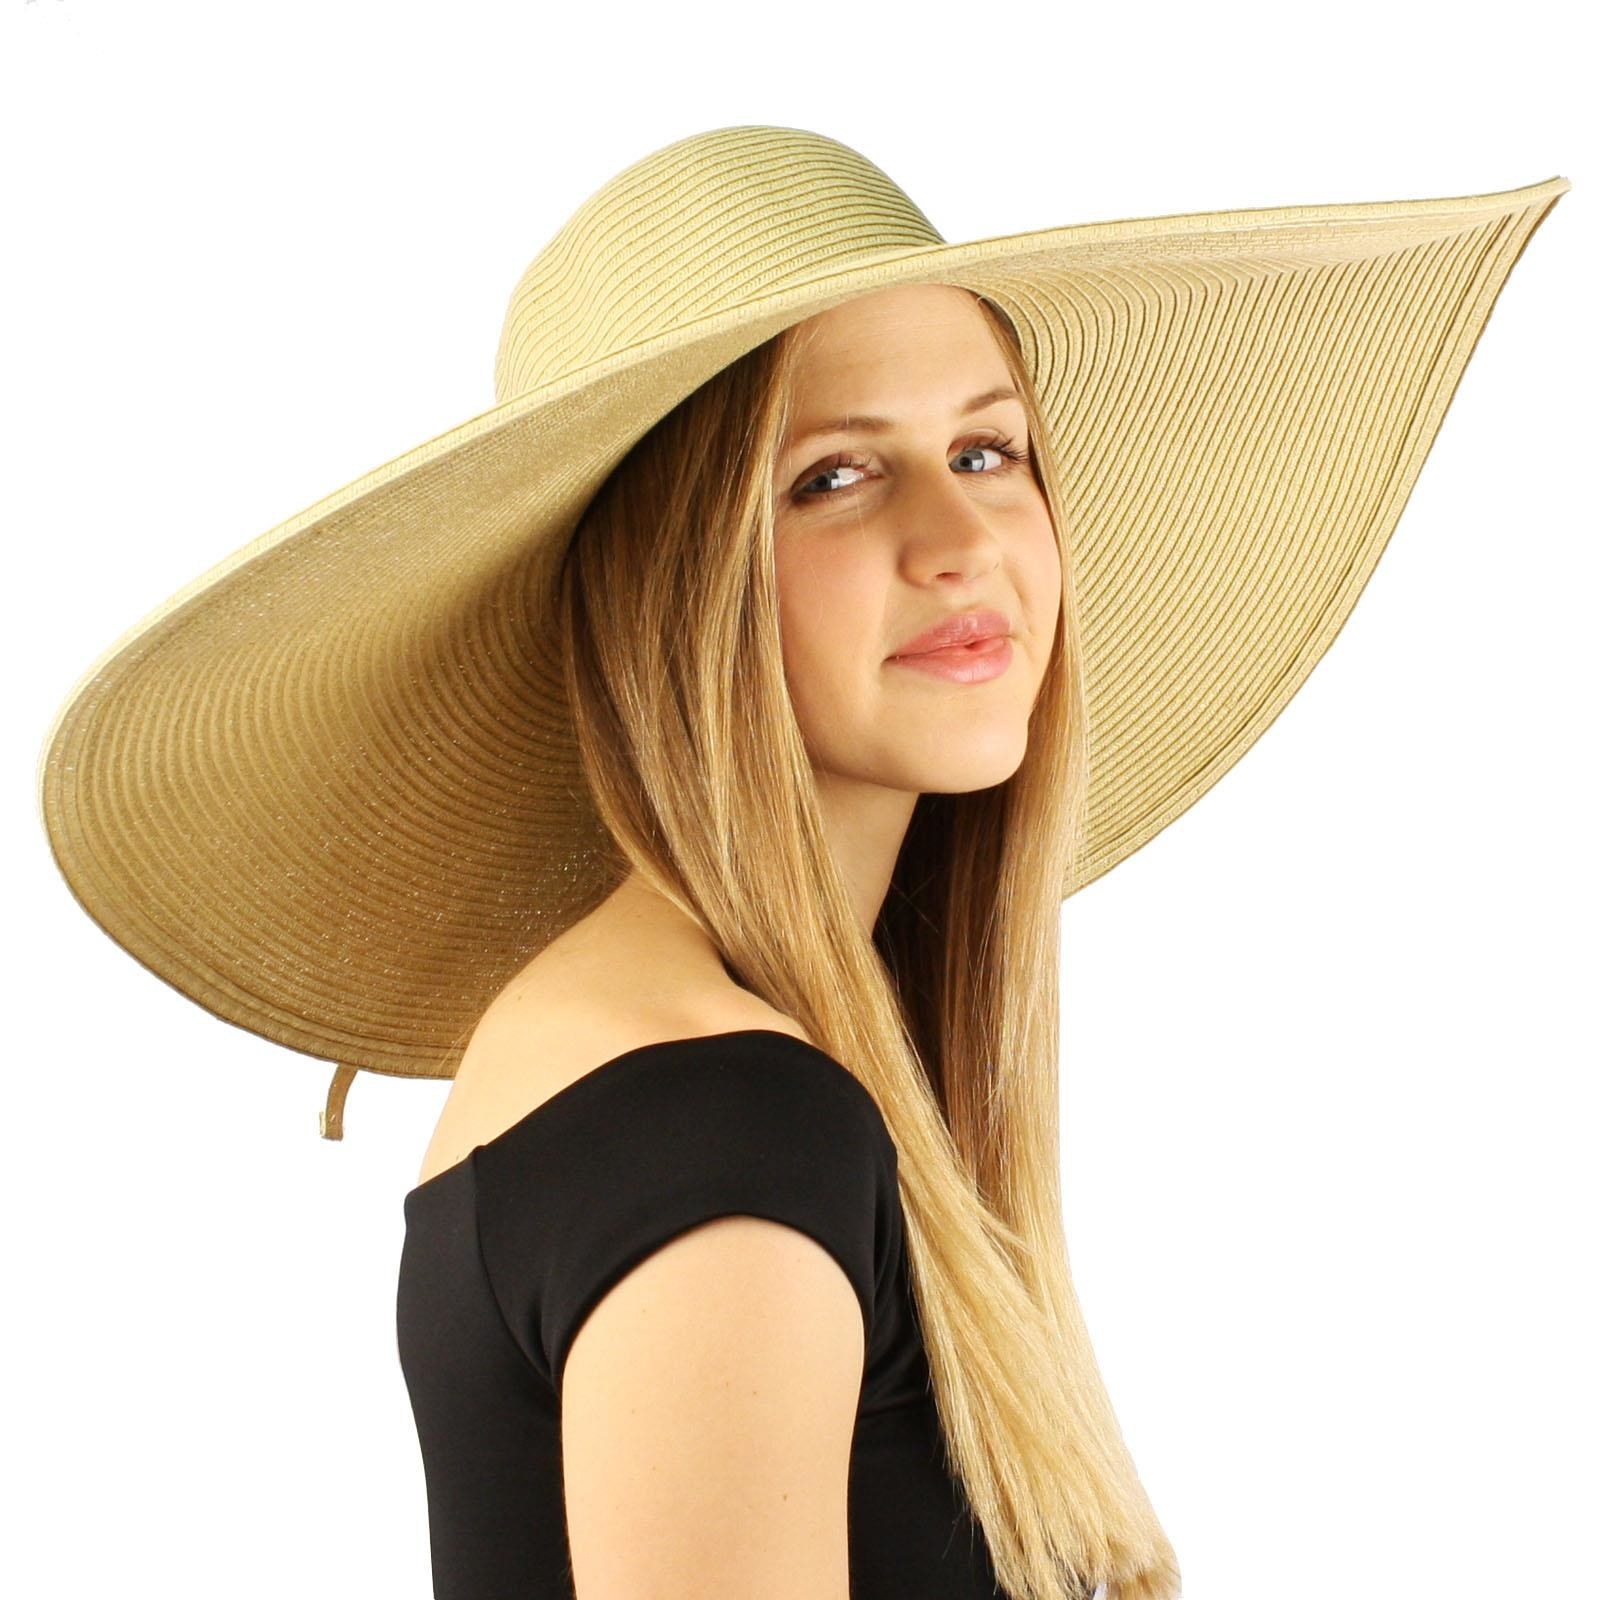 model in a wide light colored floppy hat